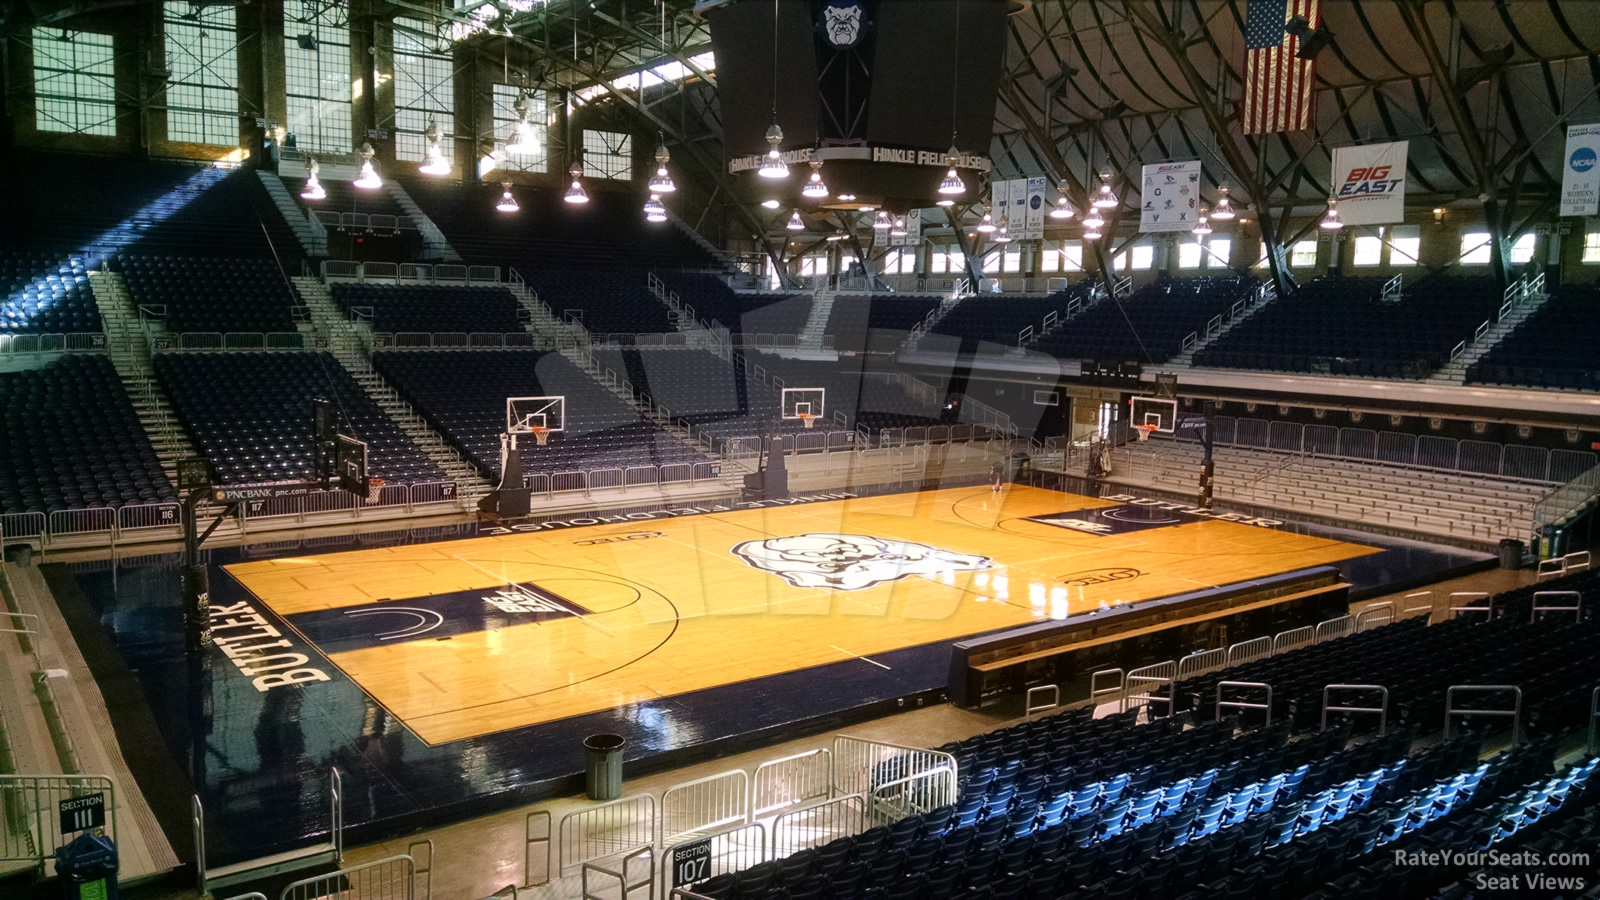 section 209, row 3 seat view  - hinkle fieldhouse